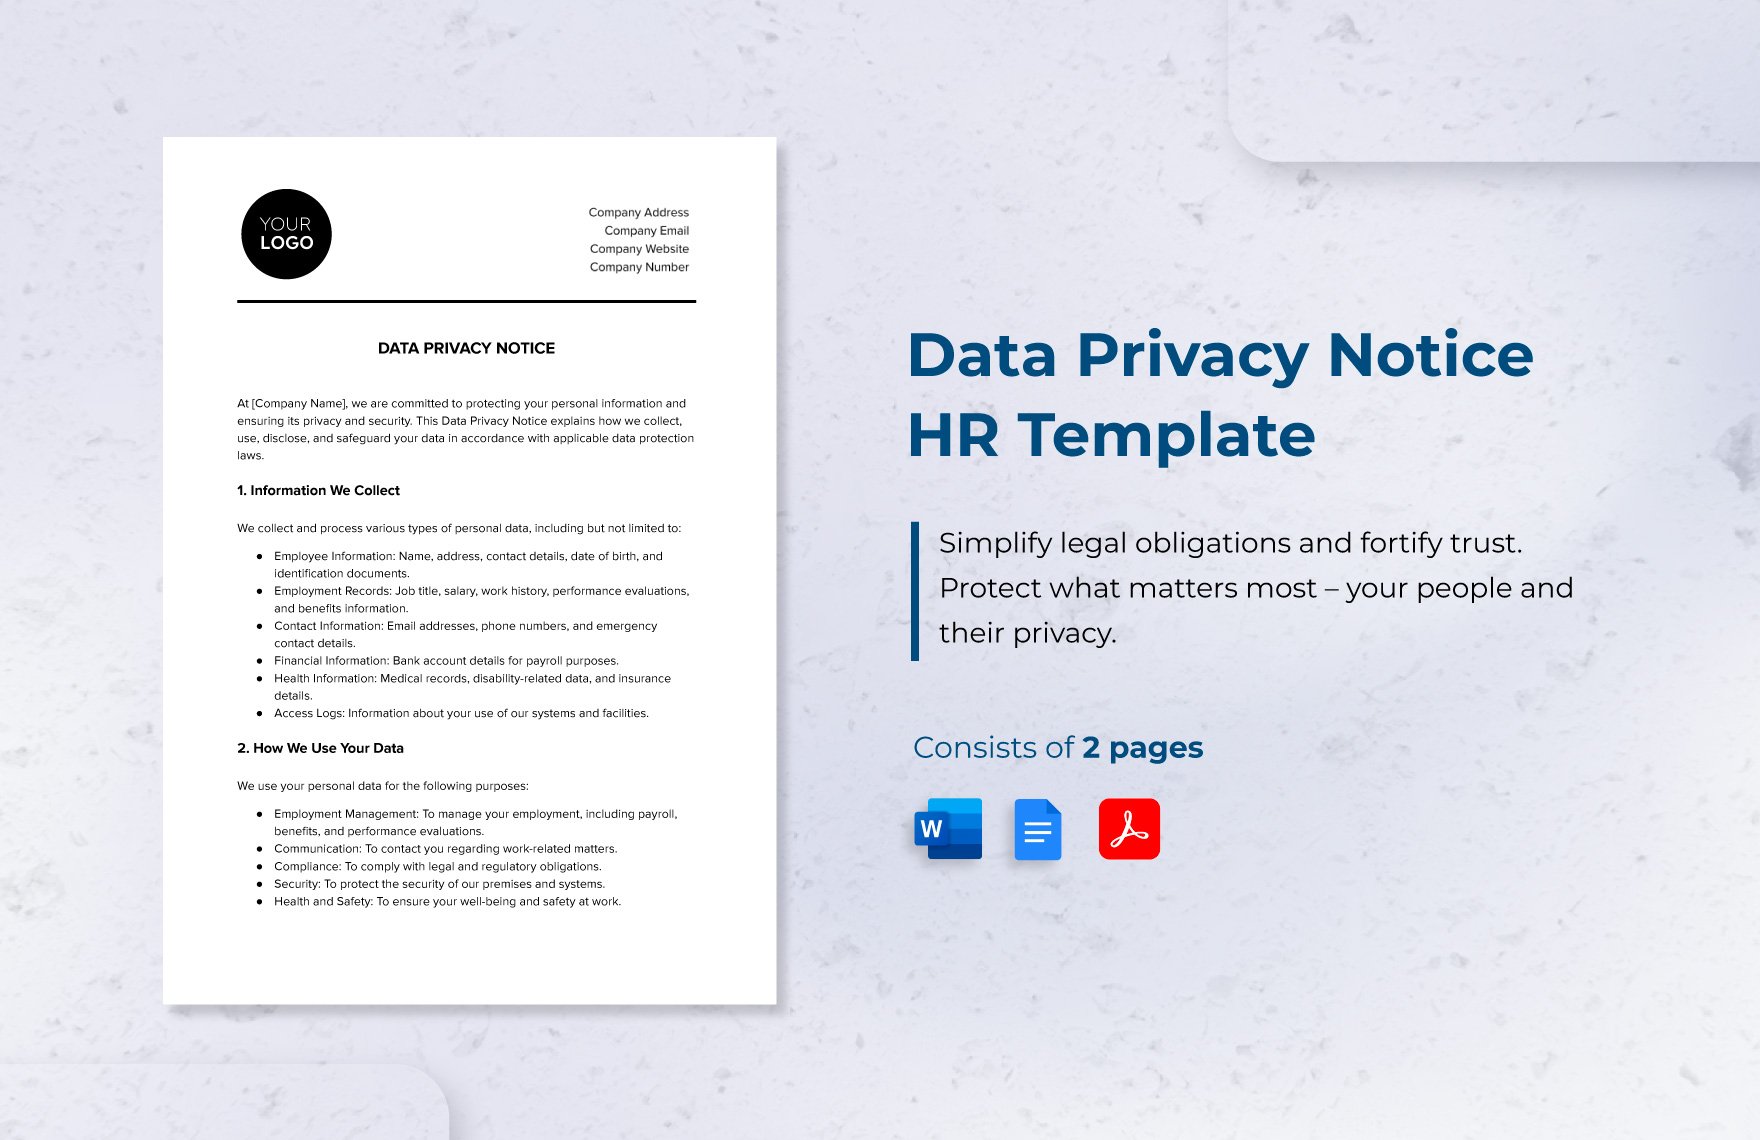 Data Privacy Notice HR Template